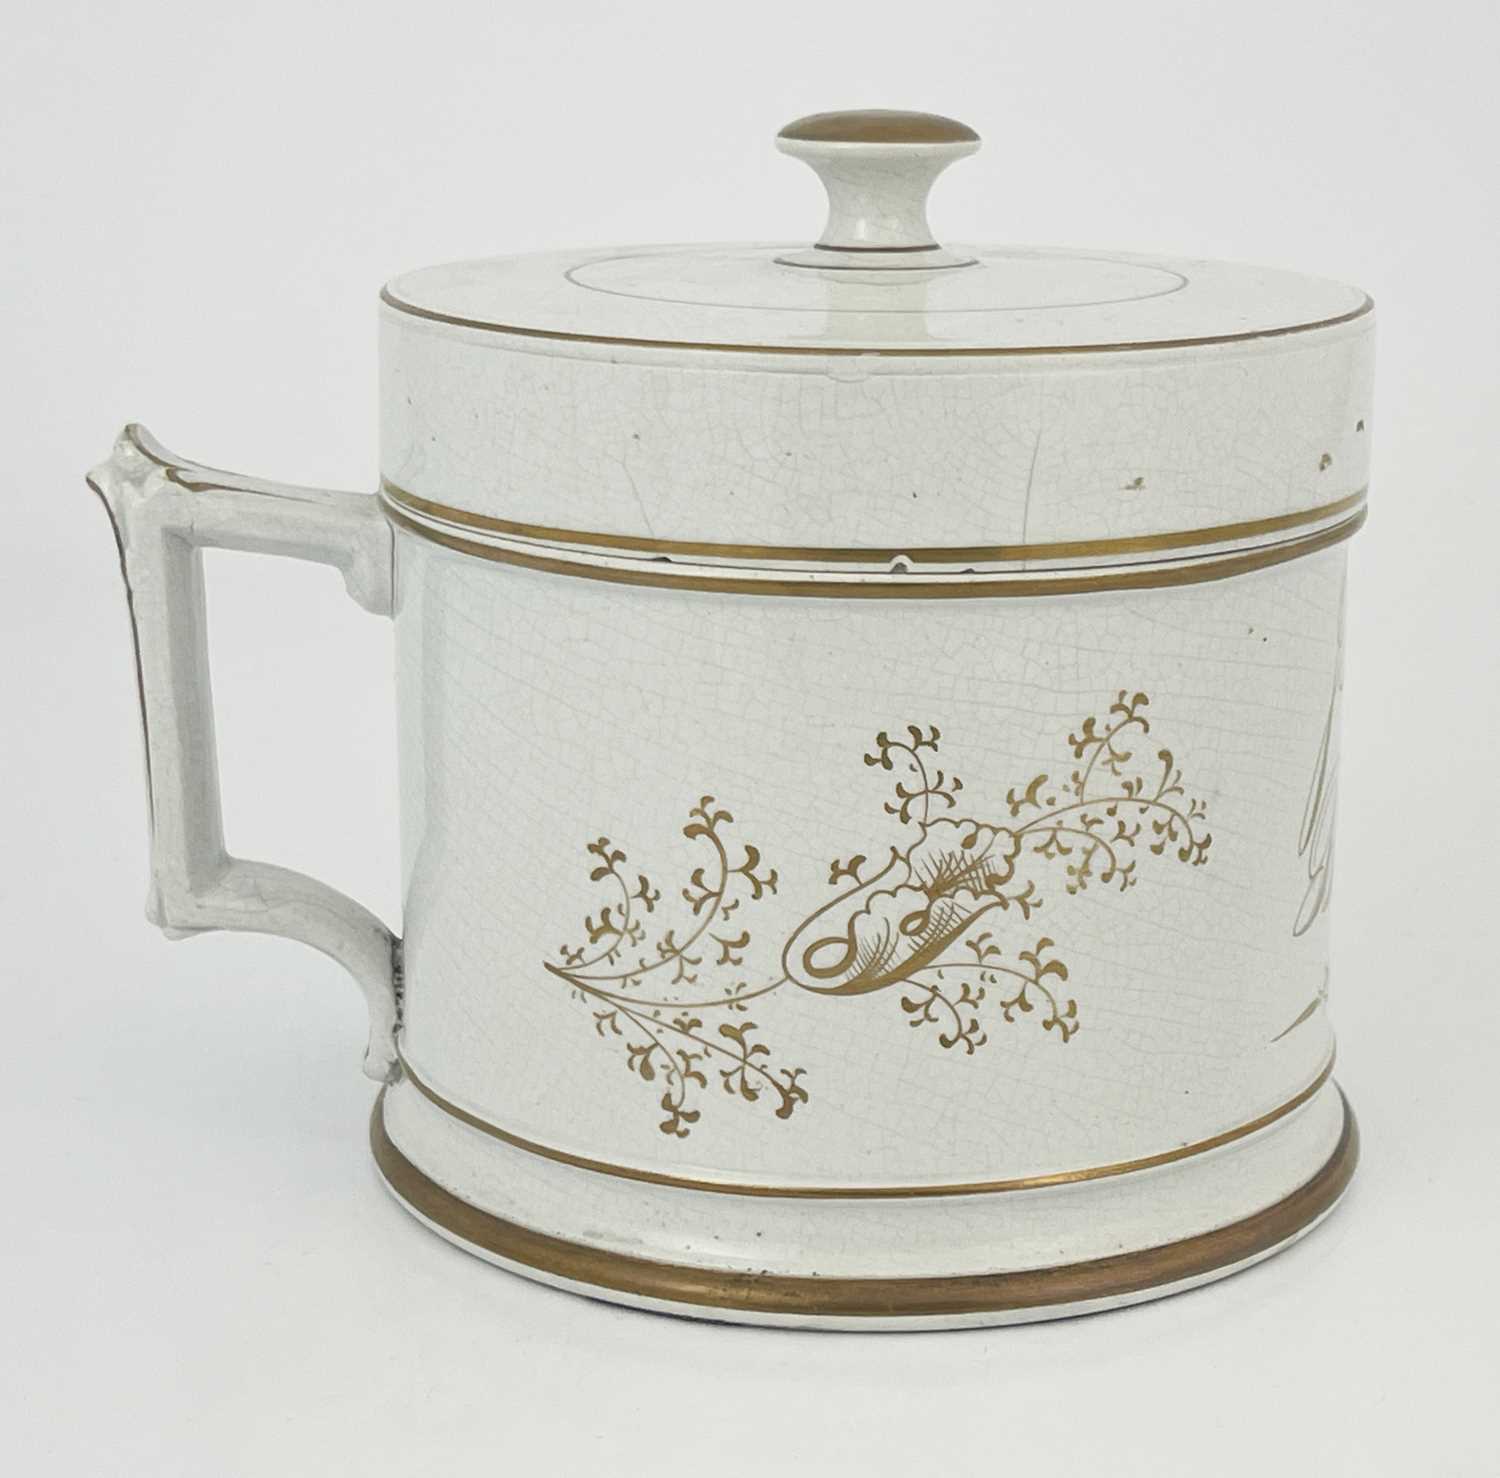 A Staffordshire pottery presentation shaving mug/tankard and cover, circa 1850, with gilded - Image 4 of 6